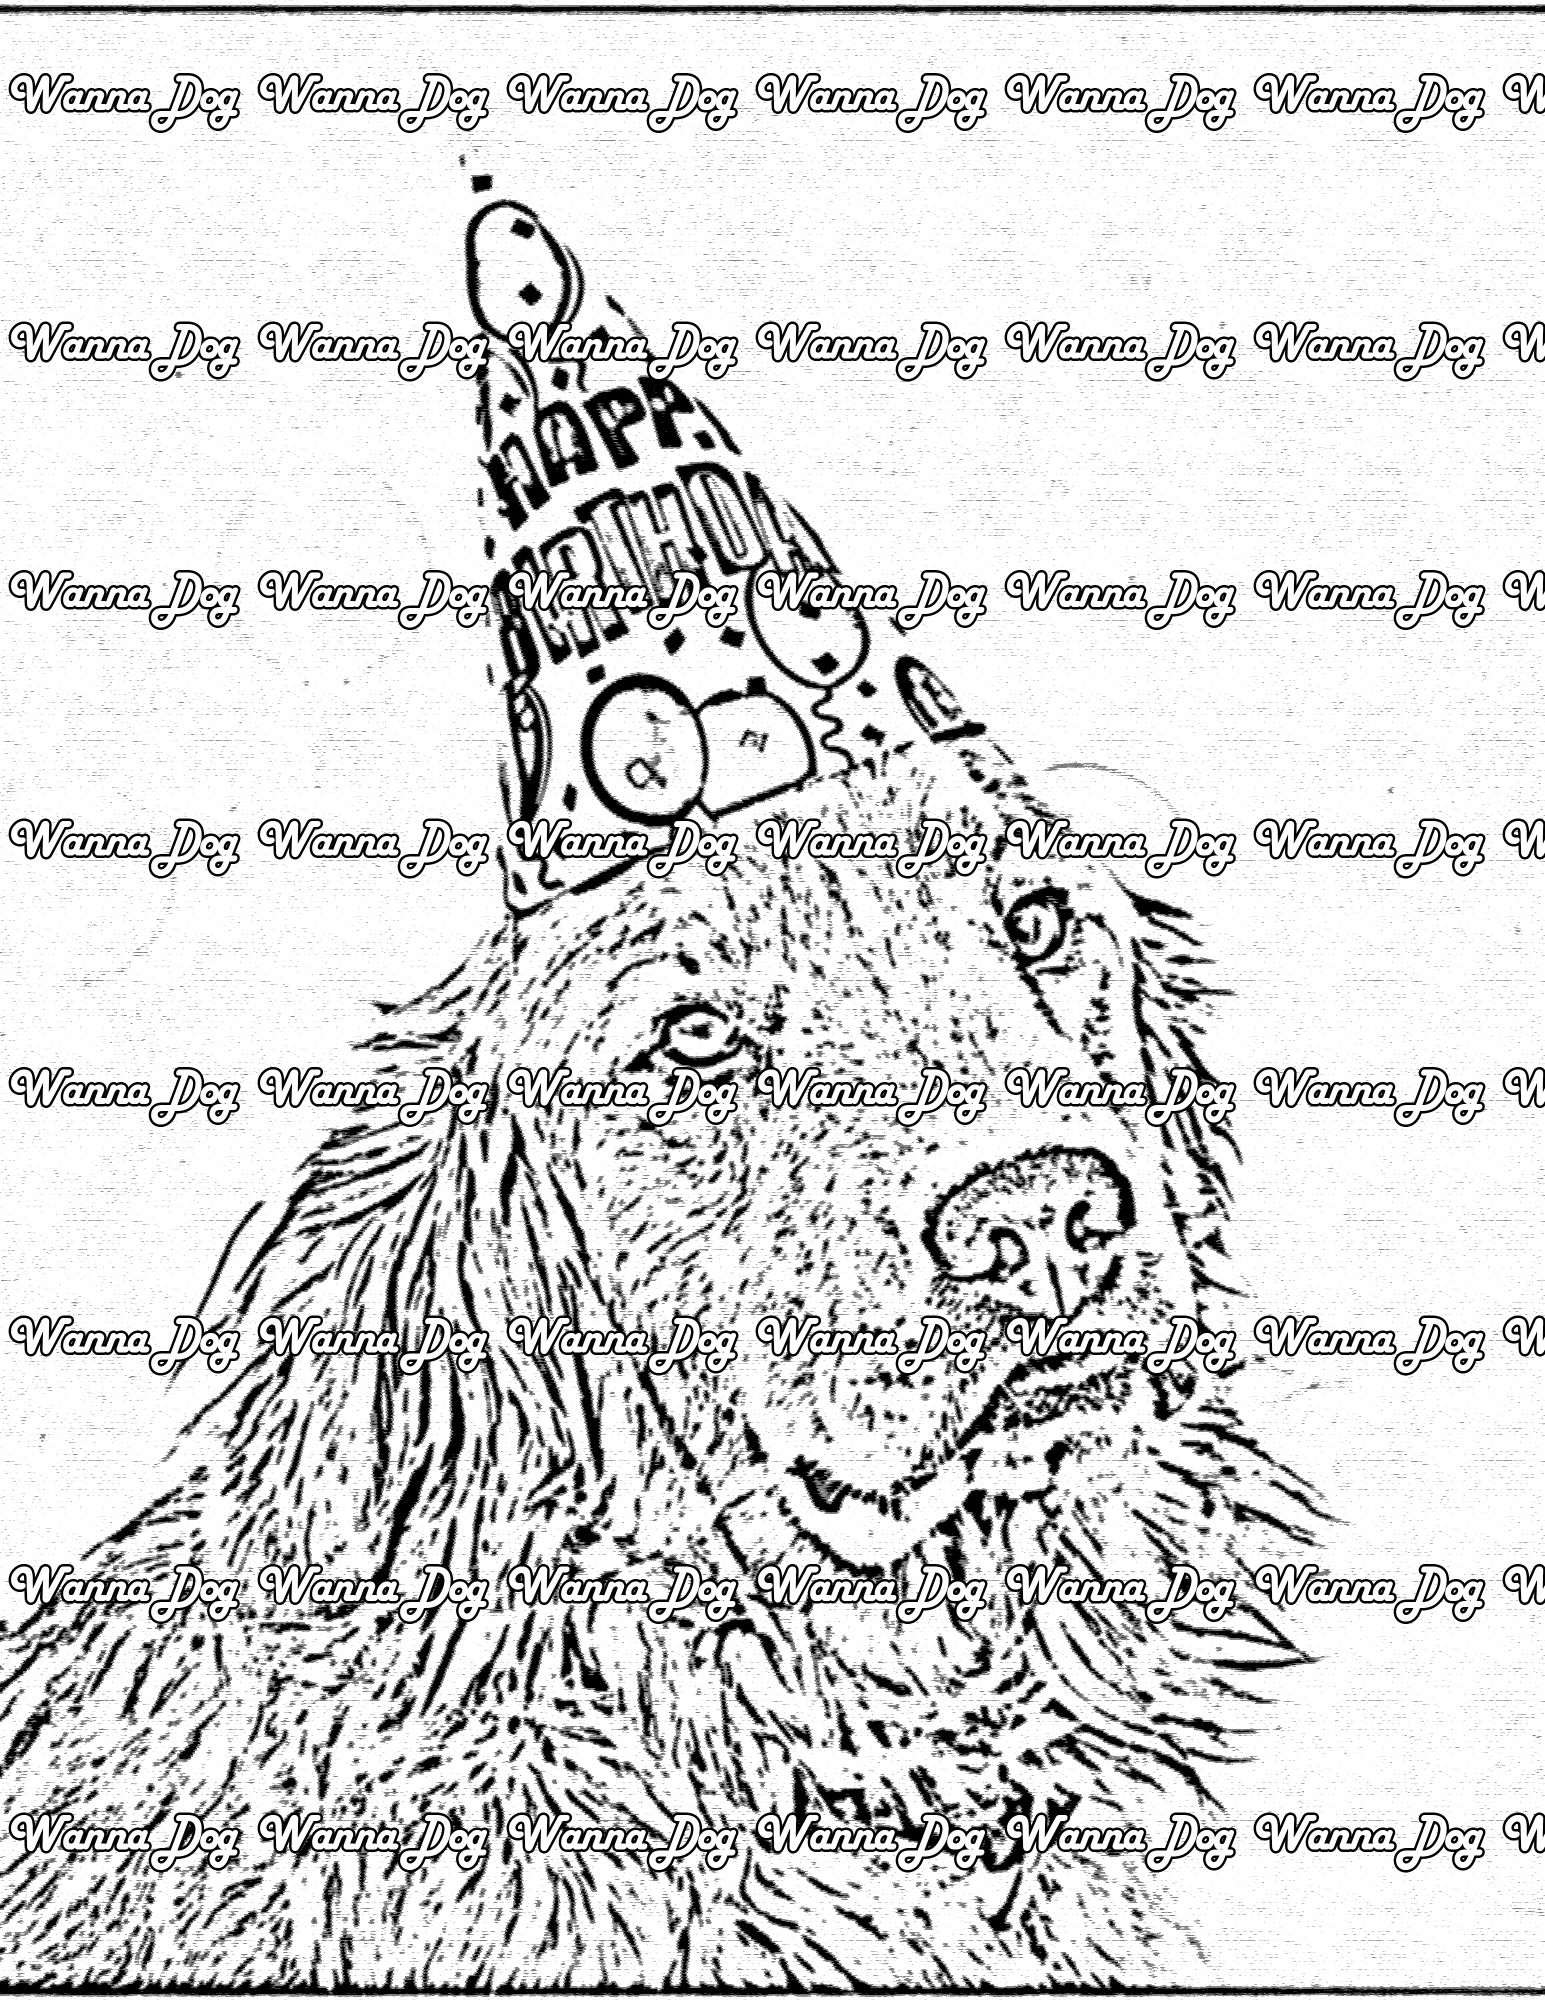 Golden Retriever Coloring Page of a Golden Retriever in a birthday hat